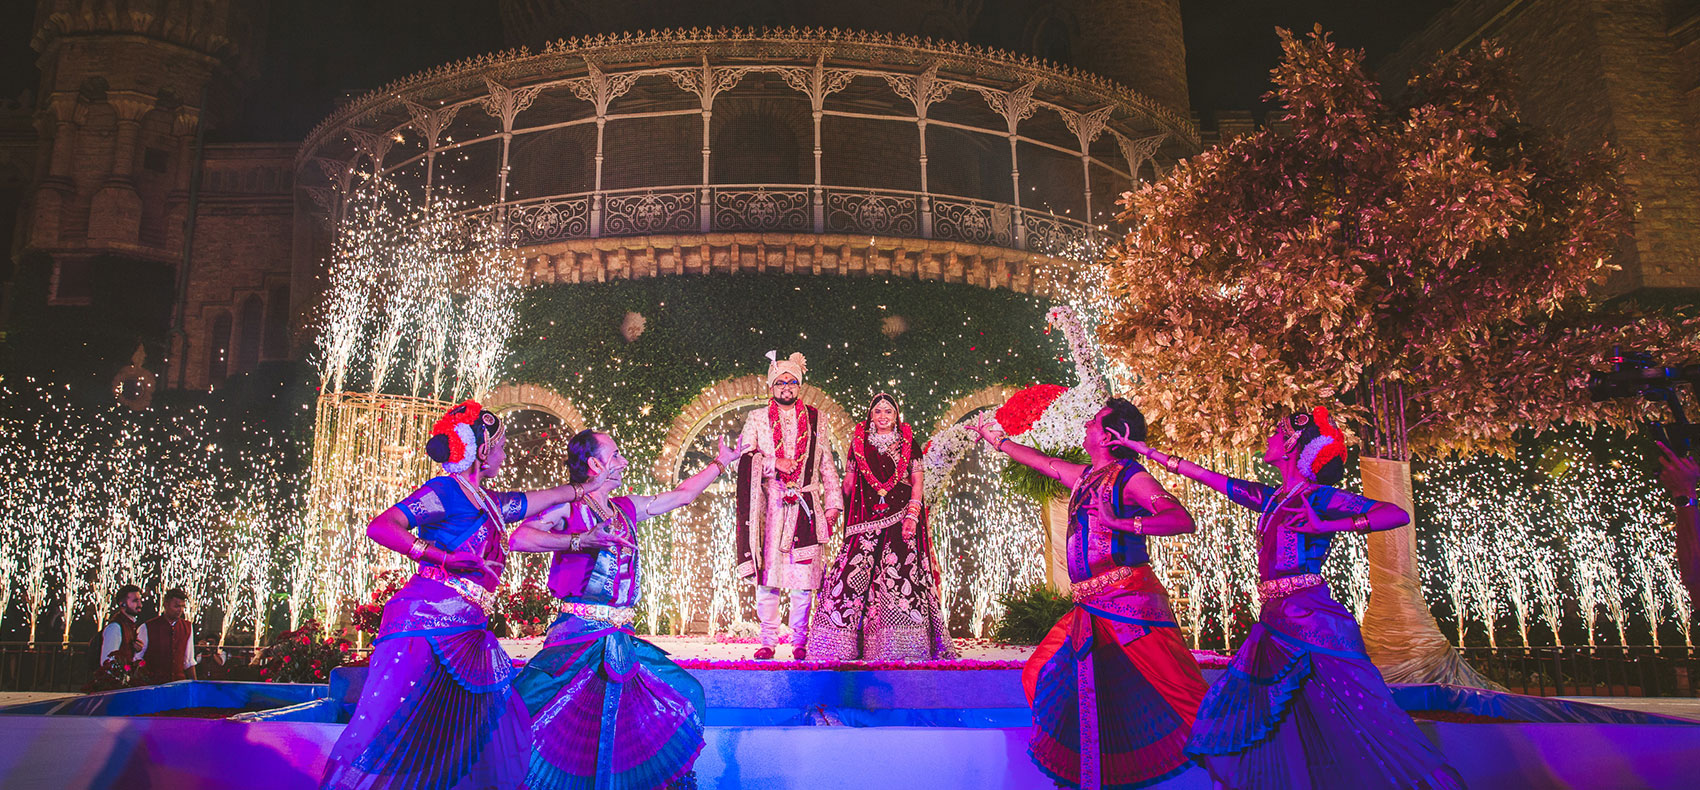 Weddings planners in India